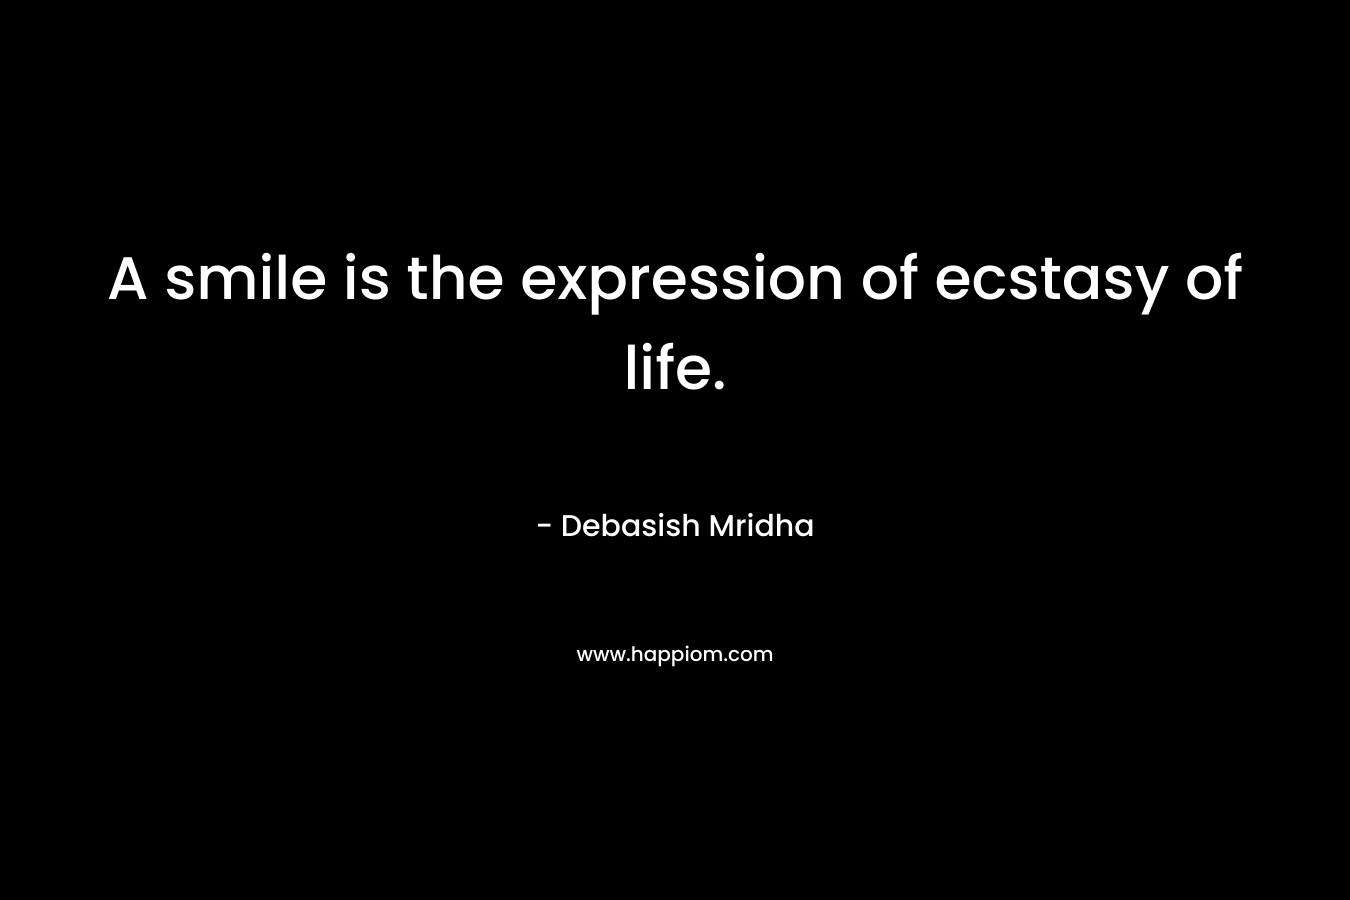 A smile is the expression of ecstasy of life. – Debasish Mridha